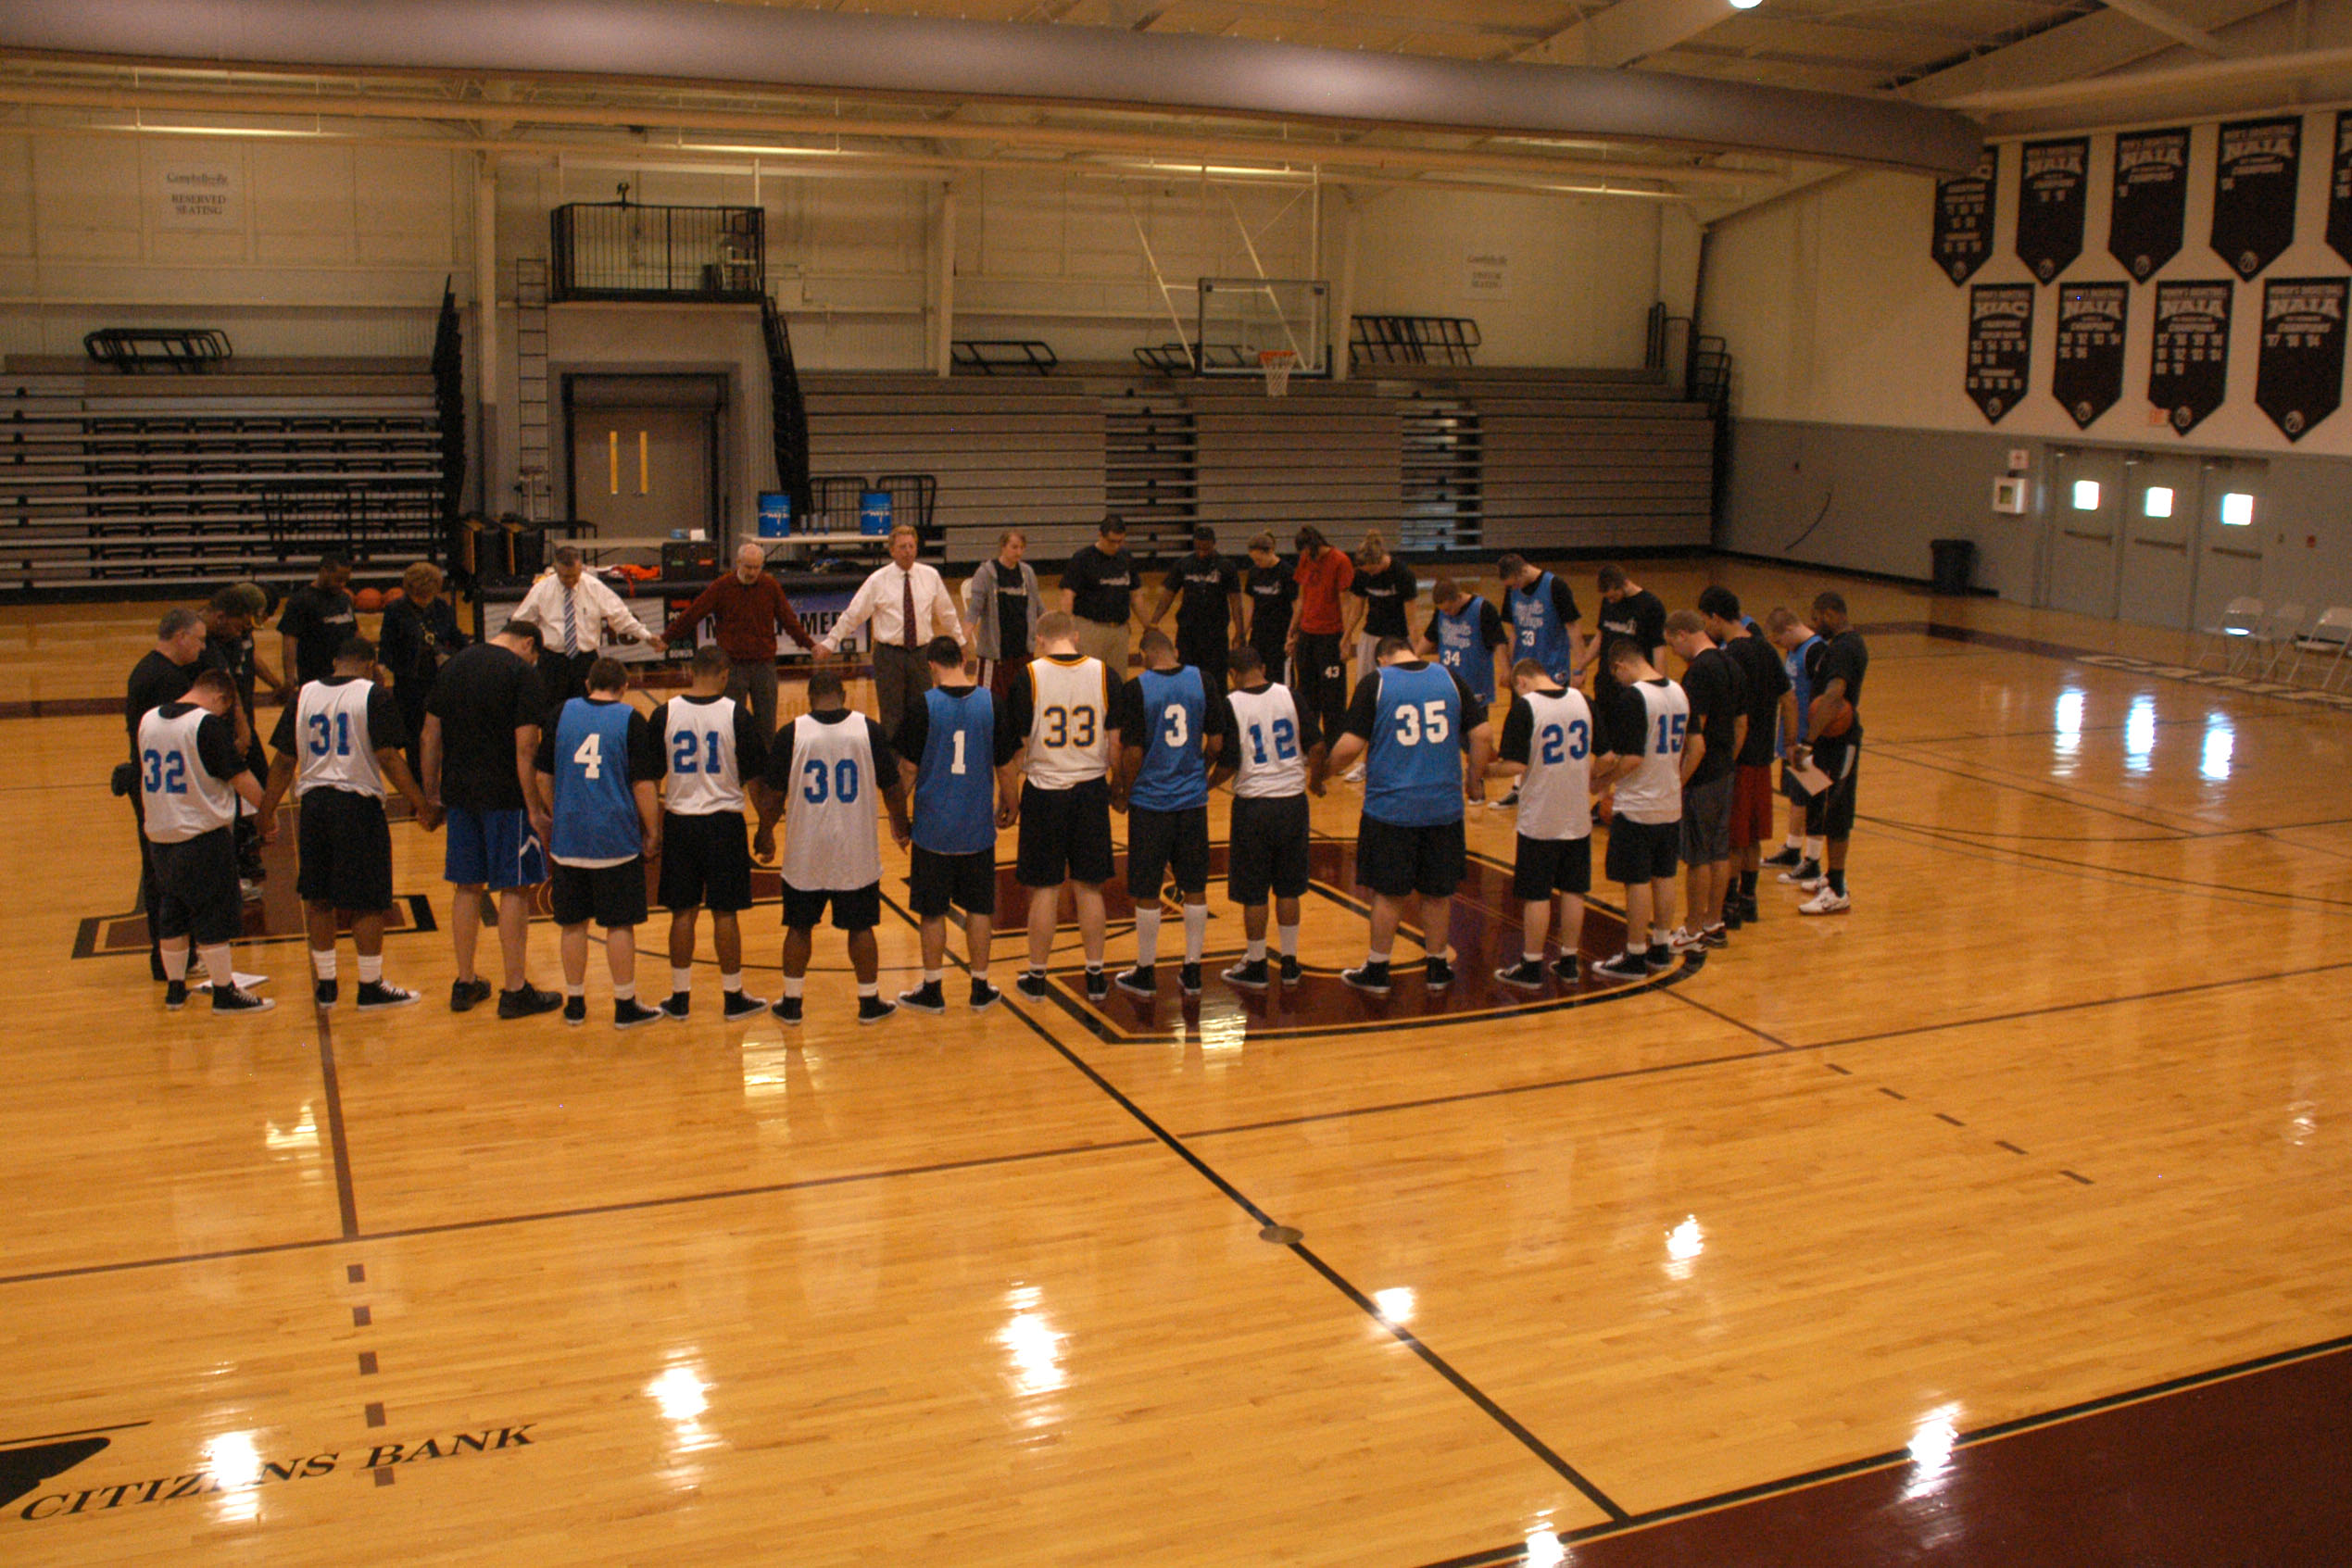 The group prays before beginning the one-day basketball clinic, which was an event at Campbellsville University held for those boys who have had “good behavior” from Lincoln Village, a boys’ detention center in Hardin County. (Campbellsville University Photo by Chris Megginson)